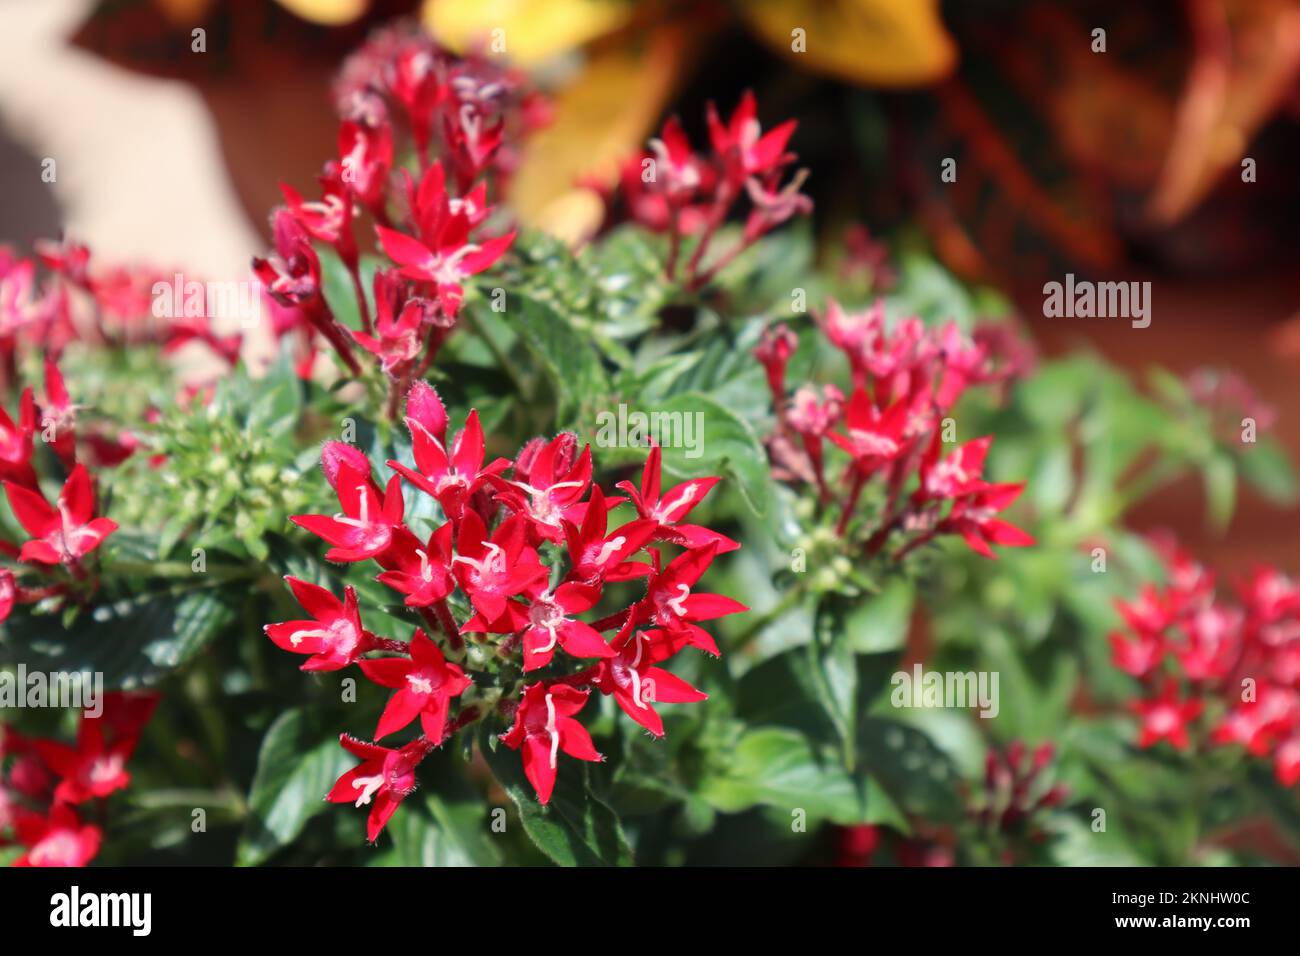 A closeup of red Pentas against burred background Stock Photo